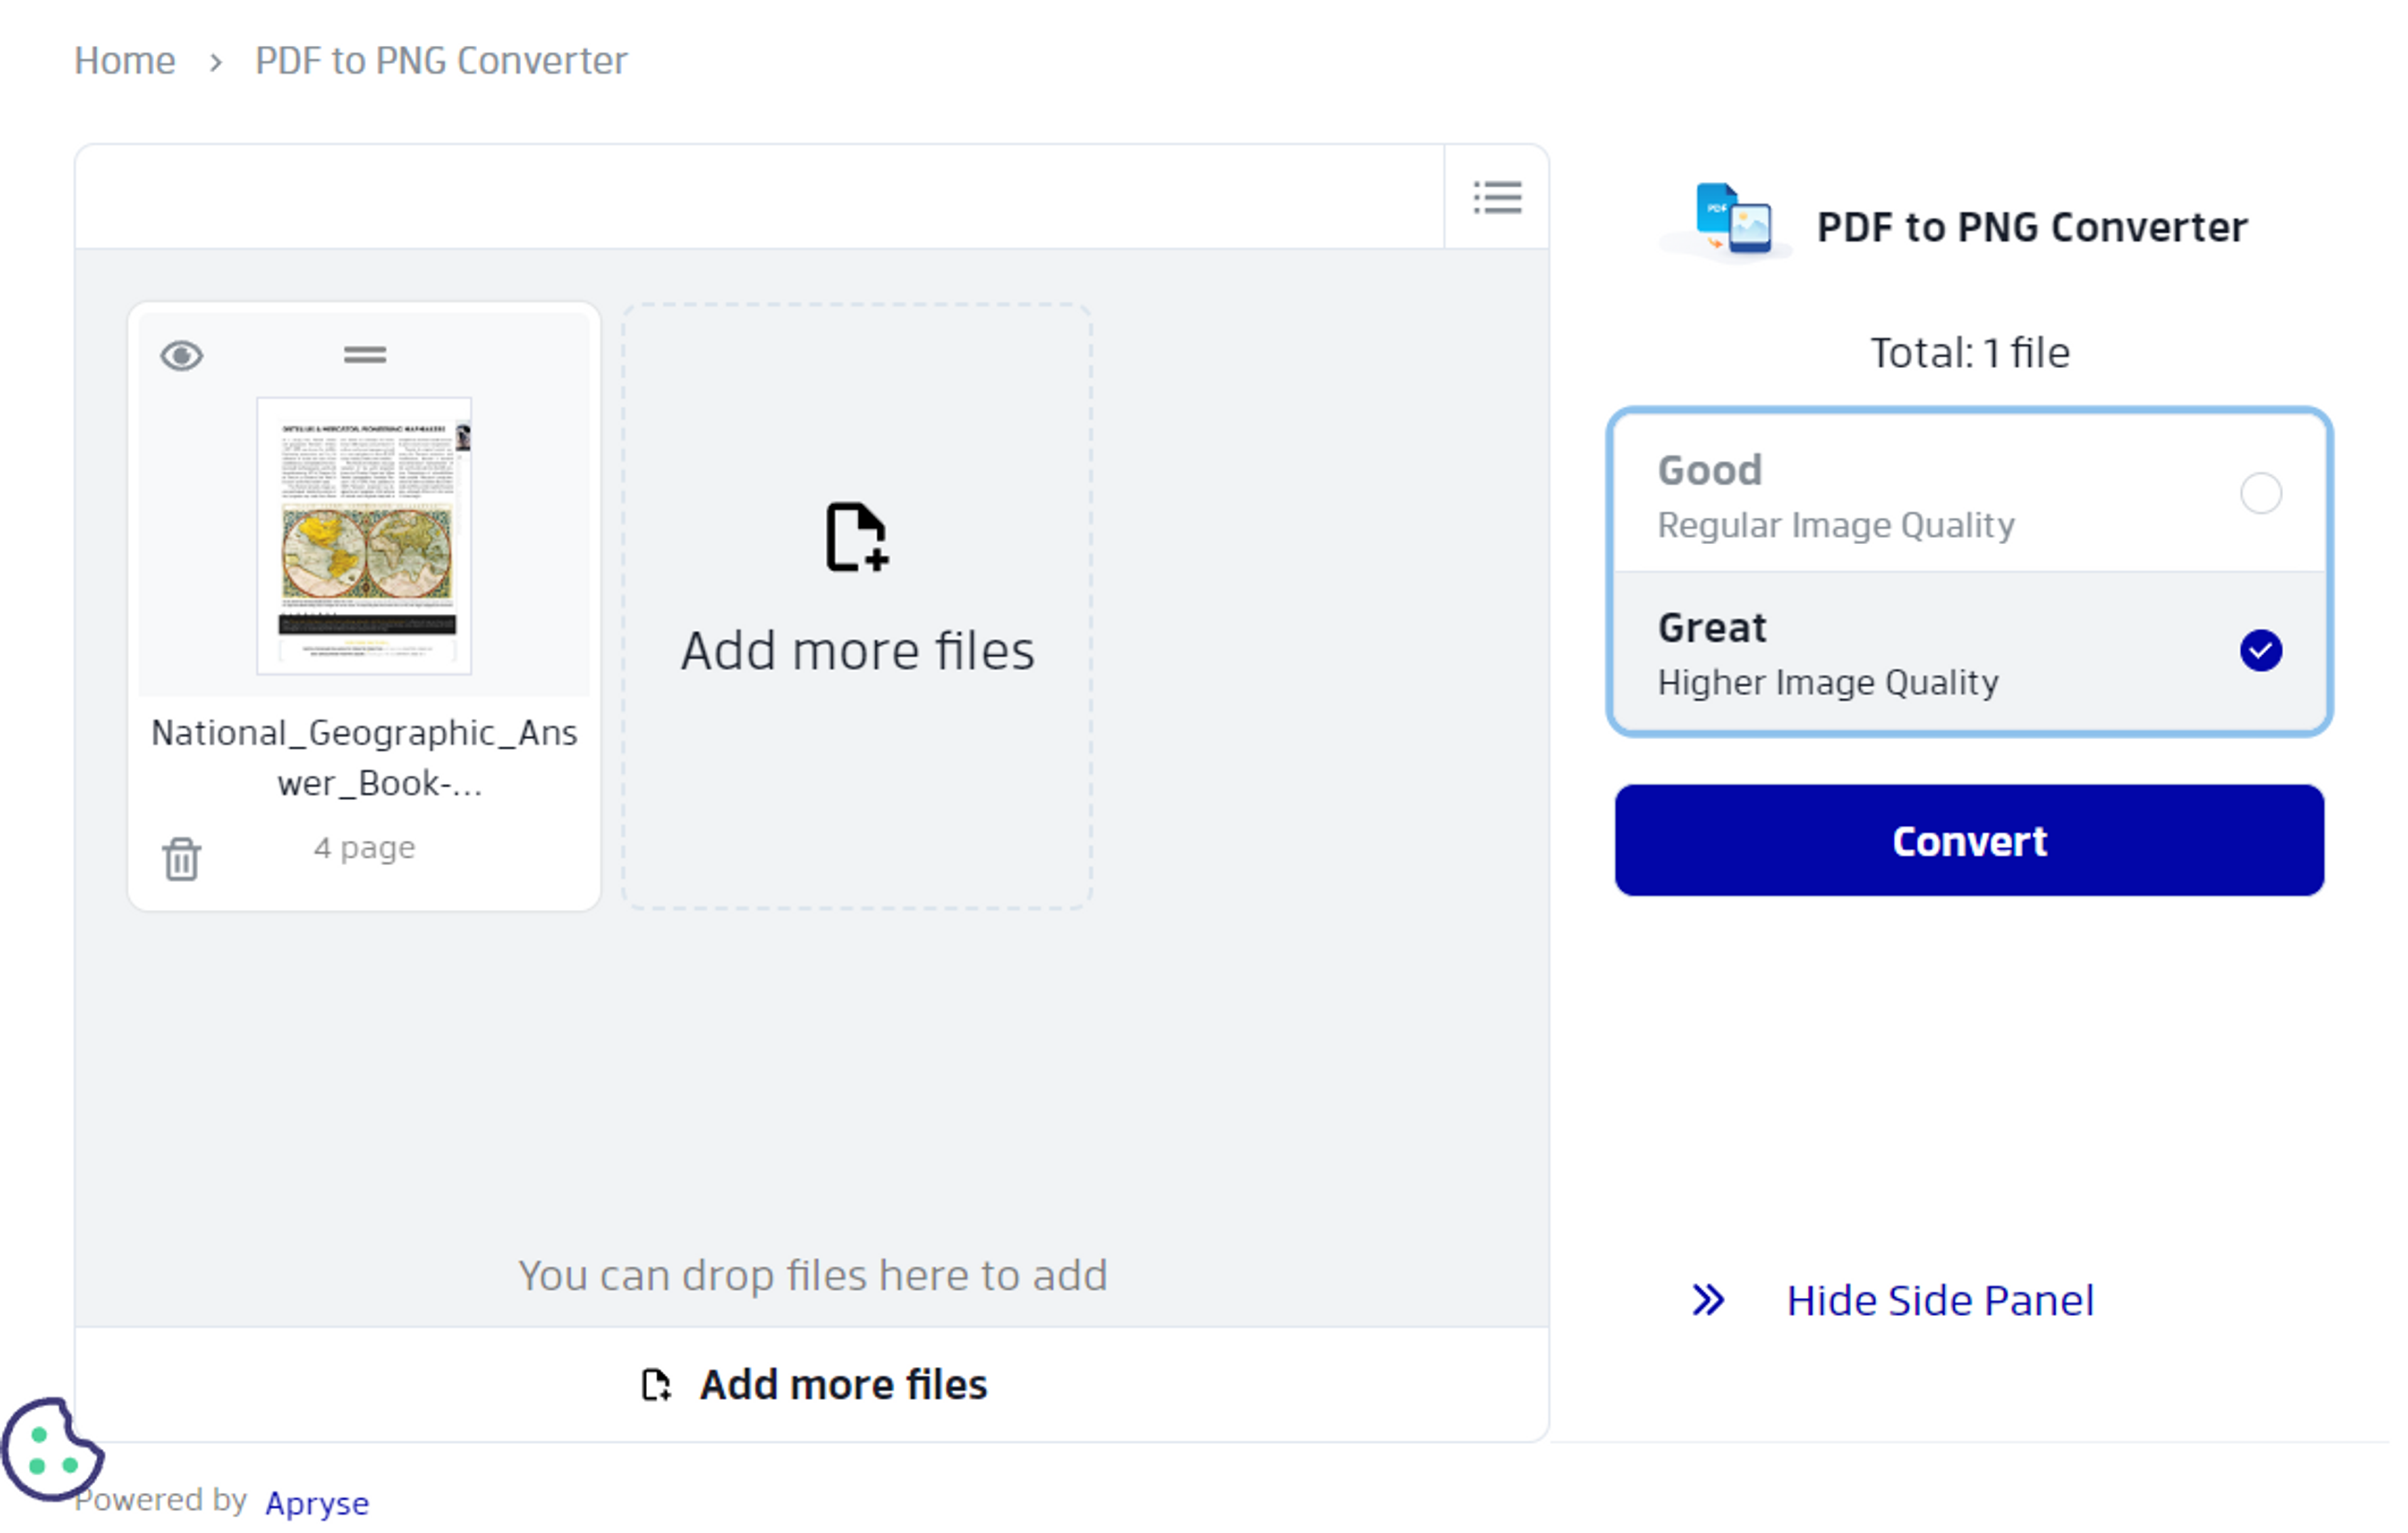 PDF to PNG converter conversion options